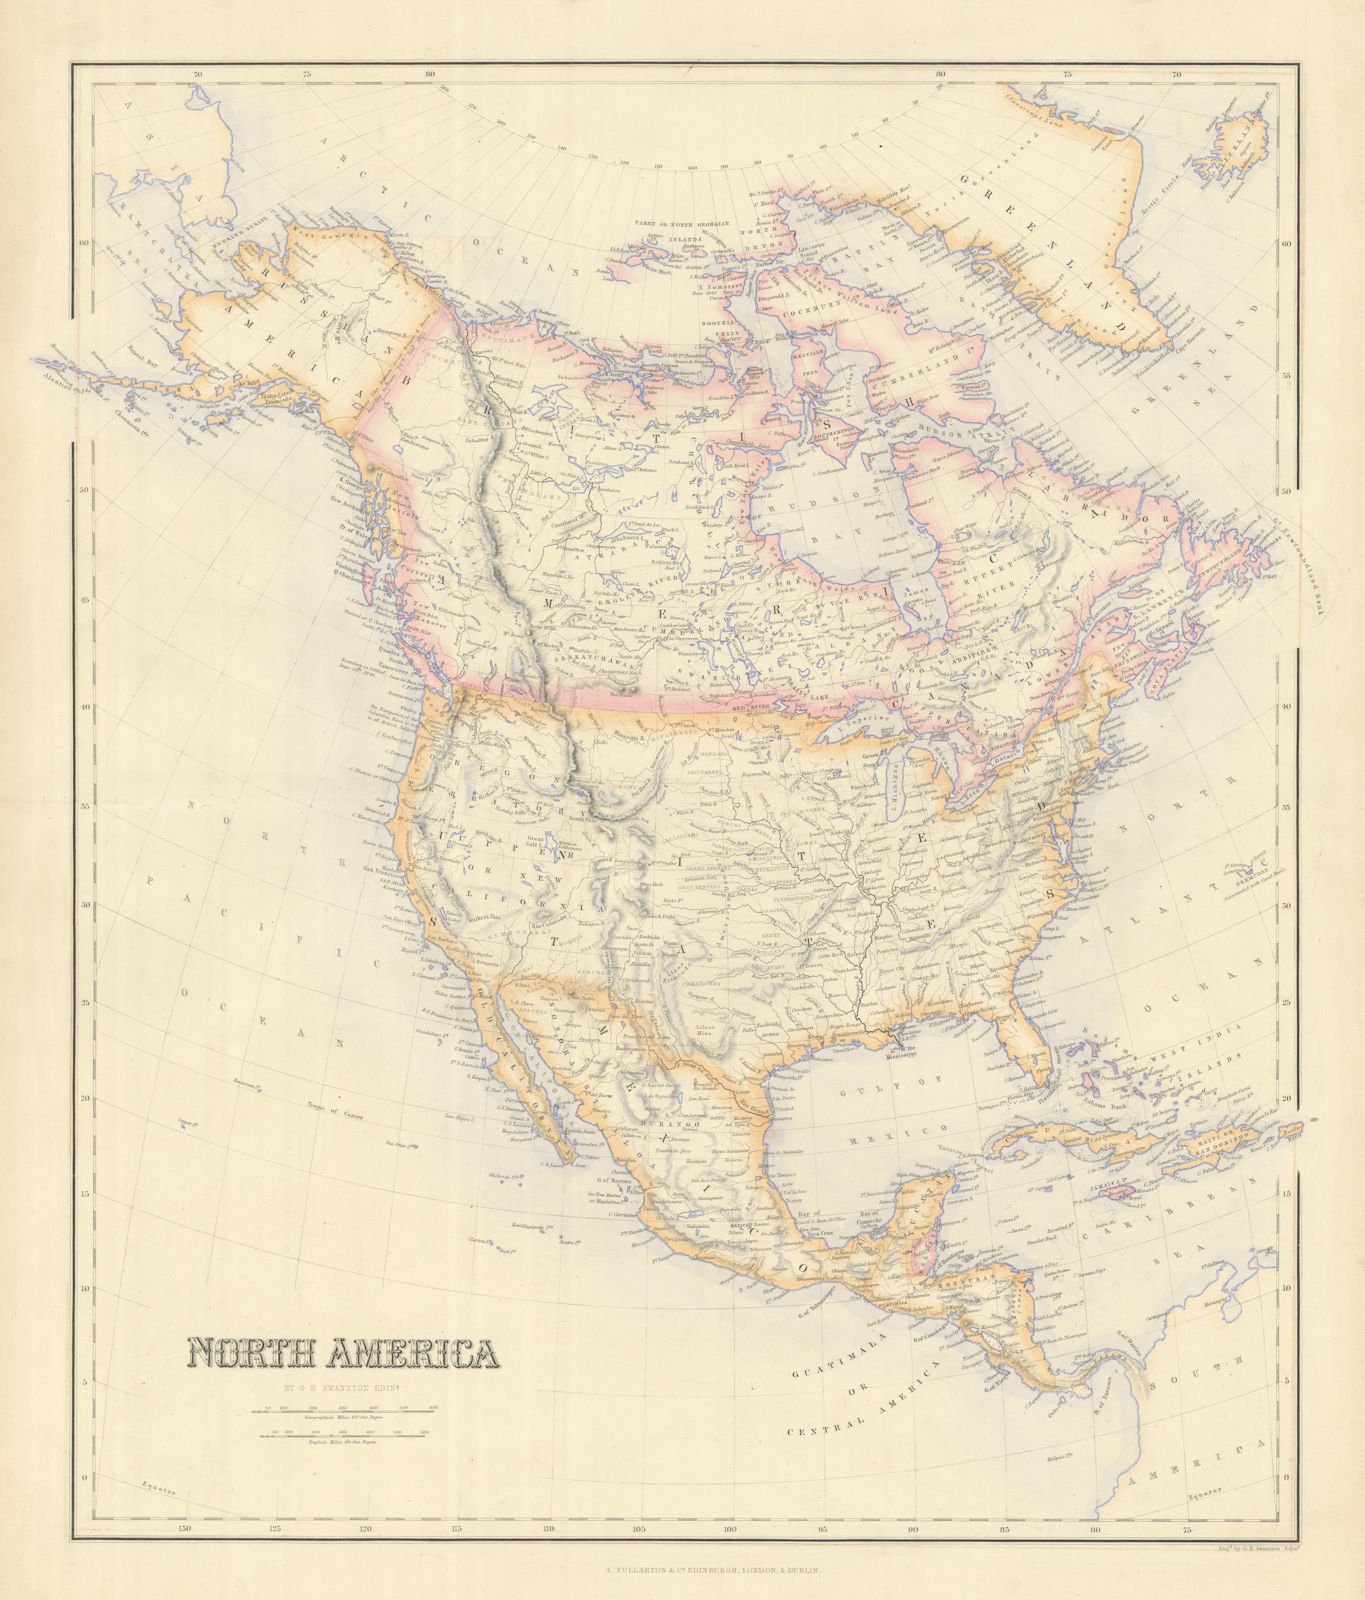 Associate Product North America. New California. Native America tribes. SWANSTON 1860 old map